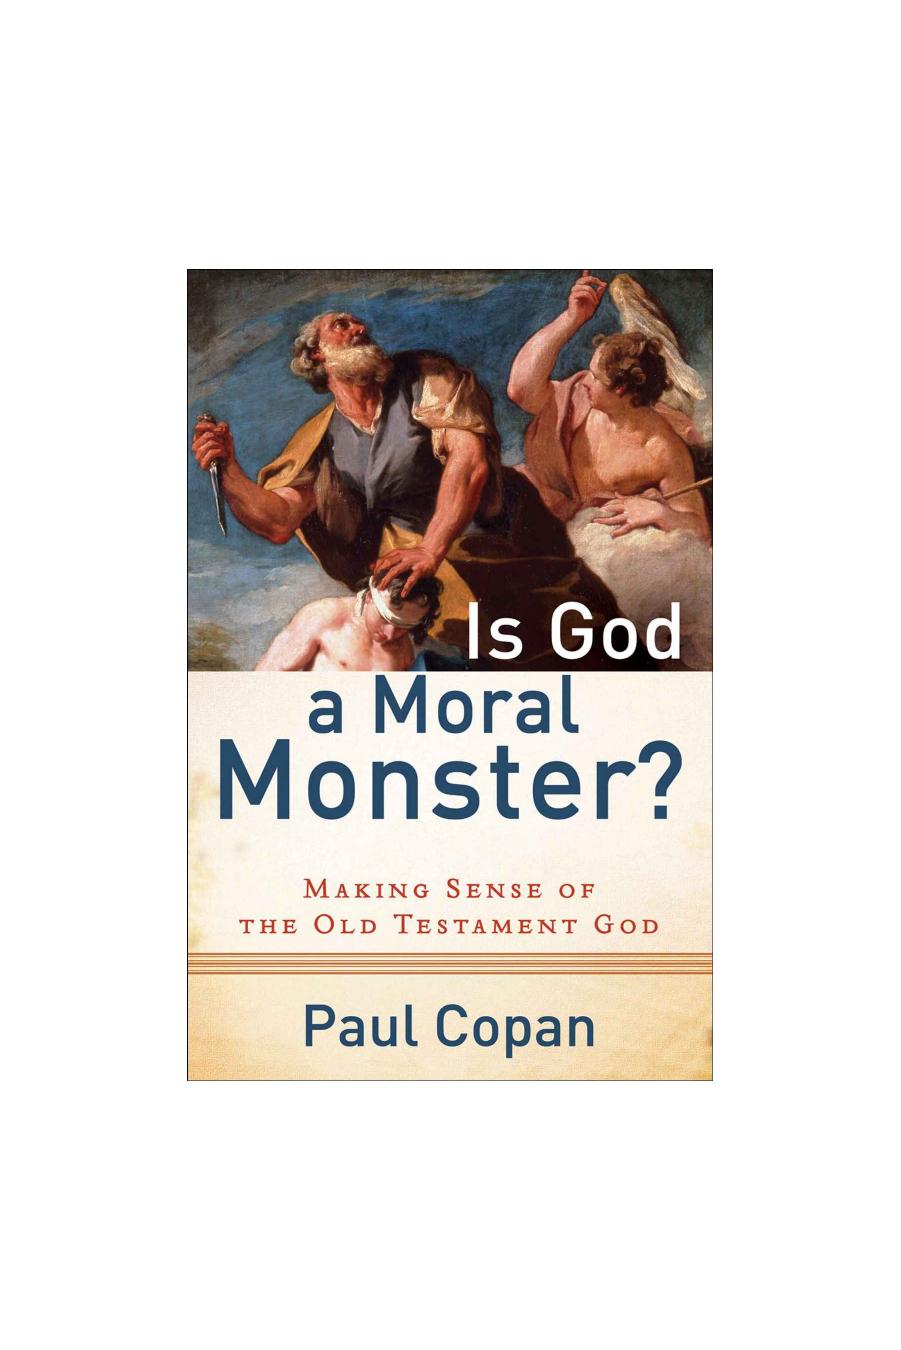 Is God a Moral Monster?: Making Sense of the Old Testament God by Paul Copan